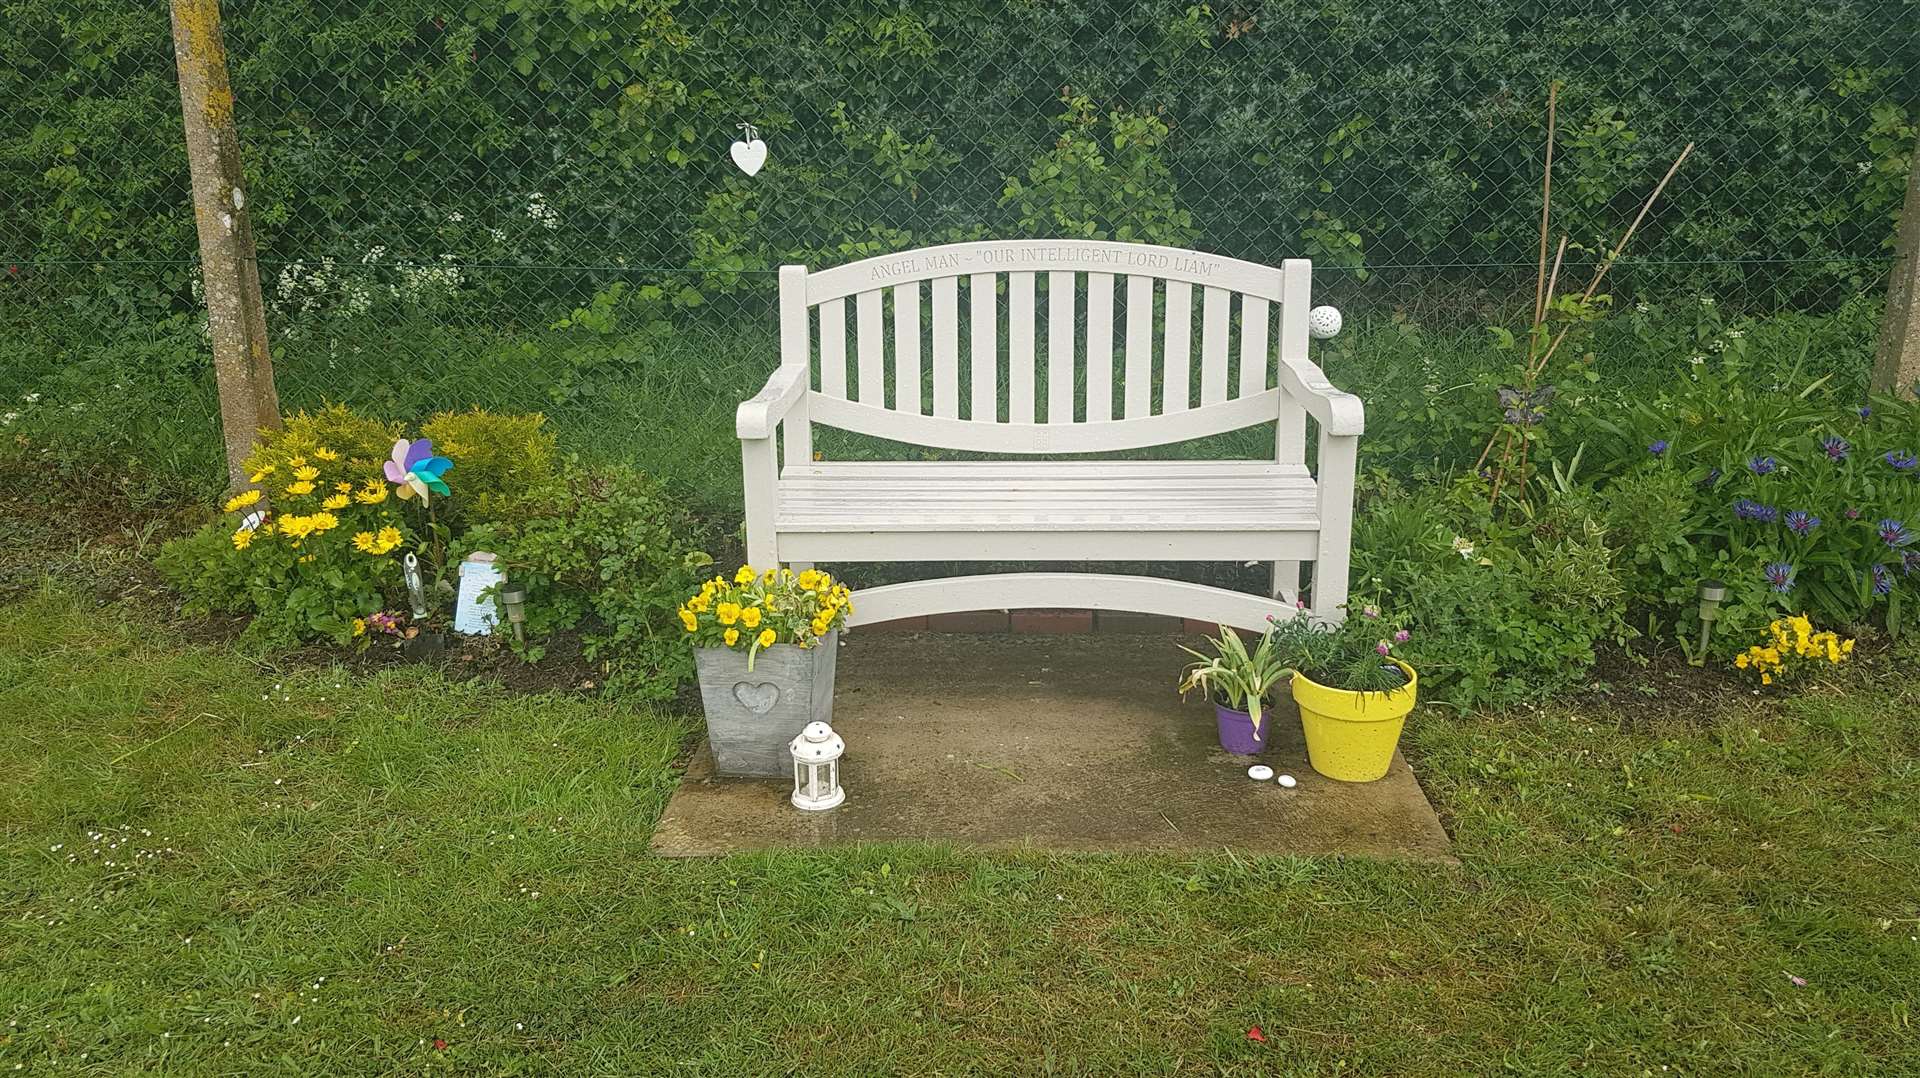 A memorial bench was also erected in memory of Liam